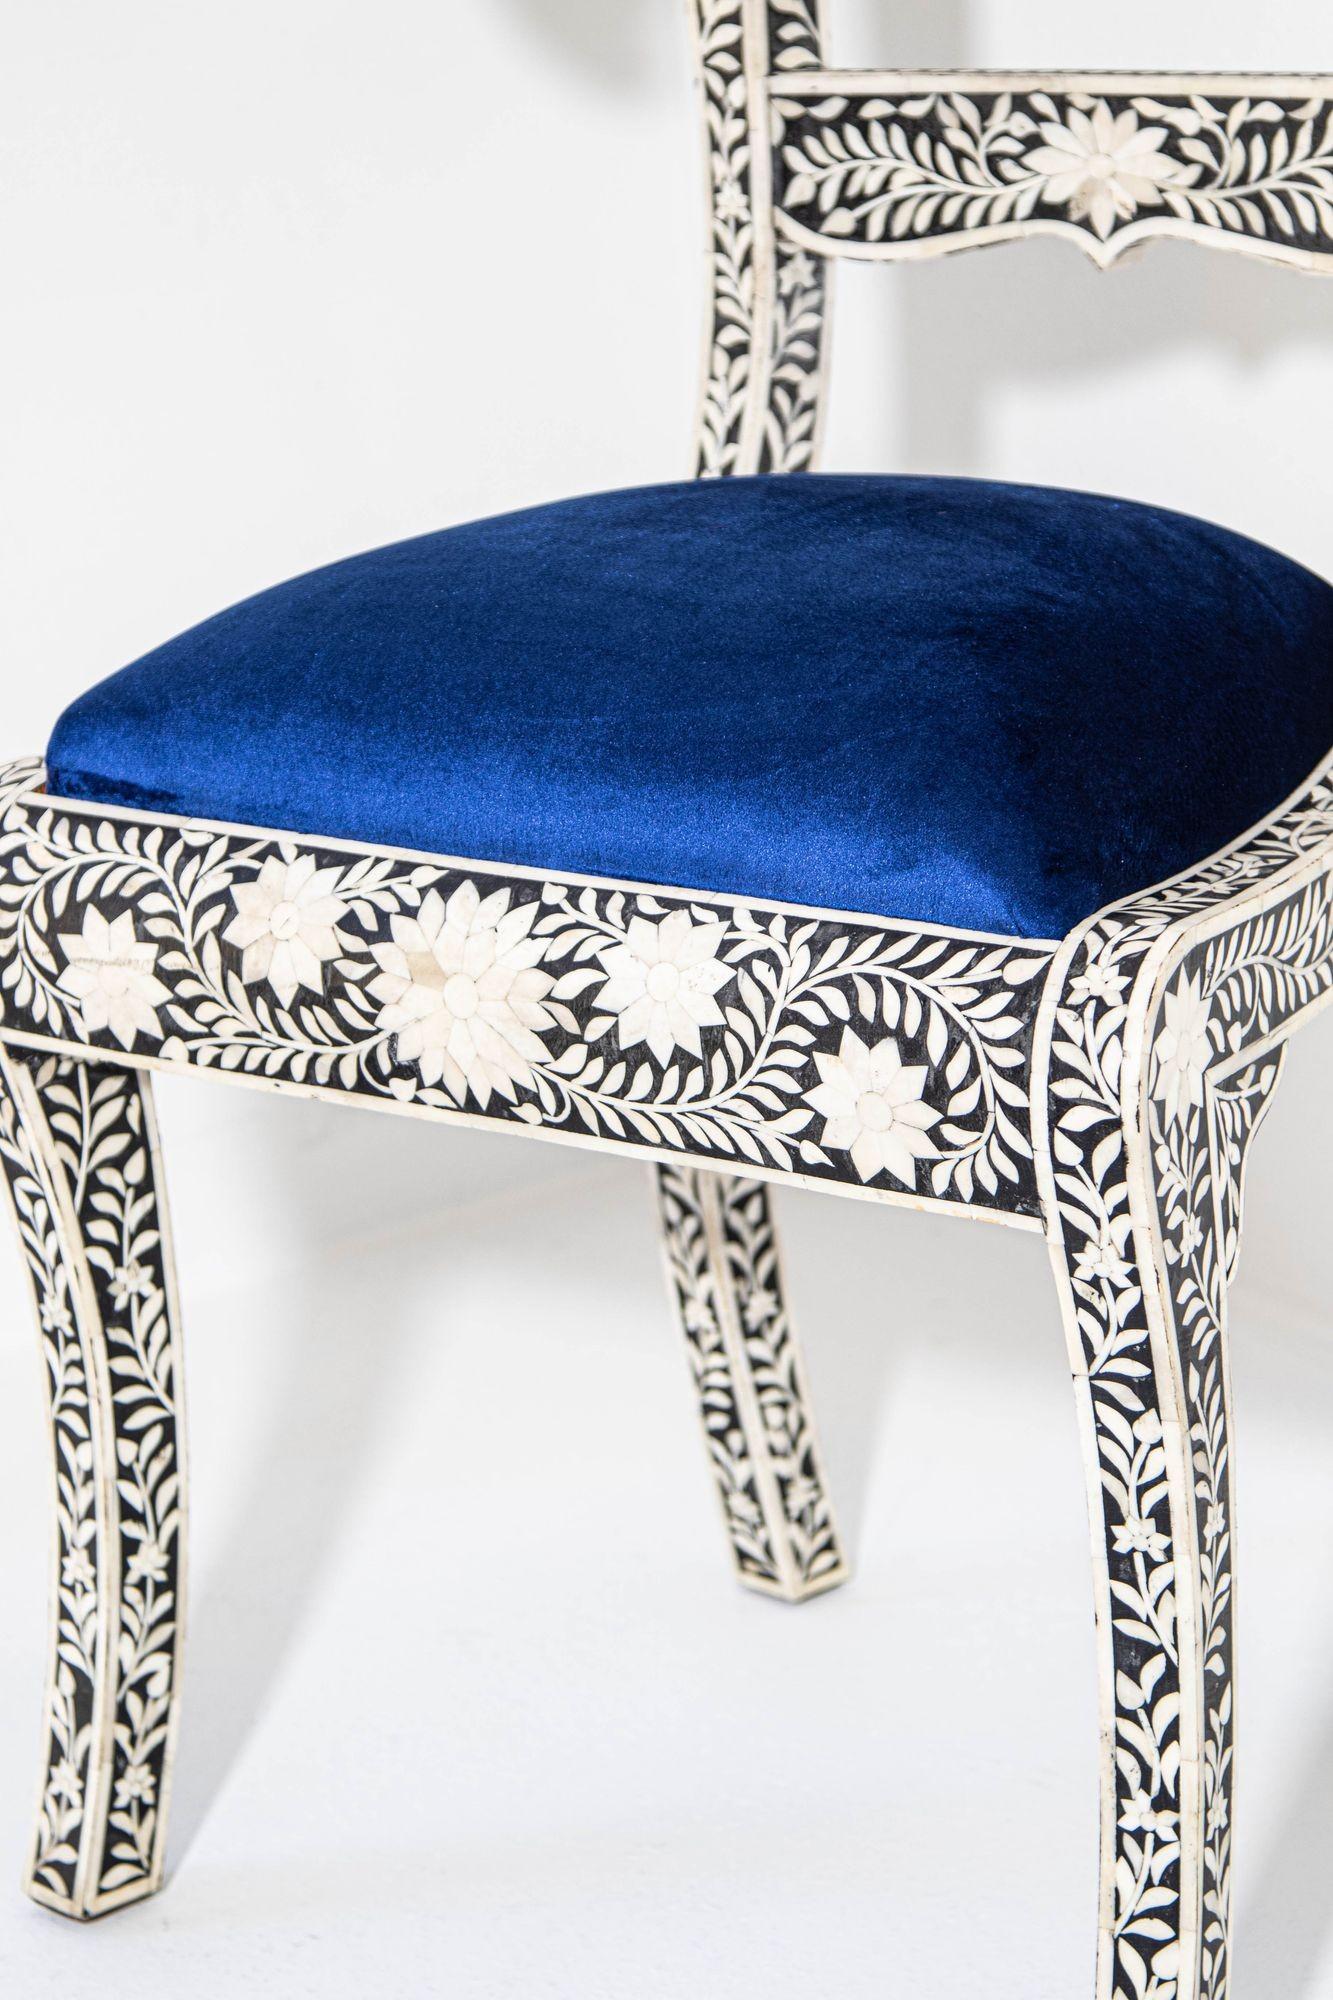 Antique Anglo-Indian Side Chair with Ram's Head Bone Inlaid Royal Blue Seat For Sale 12